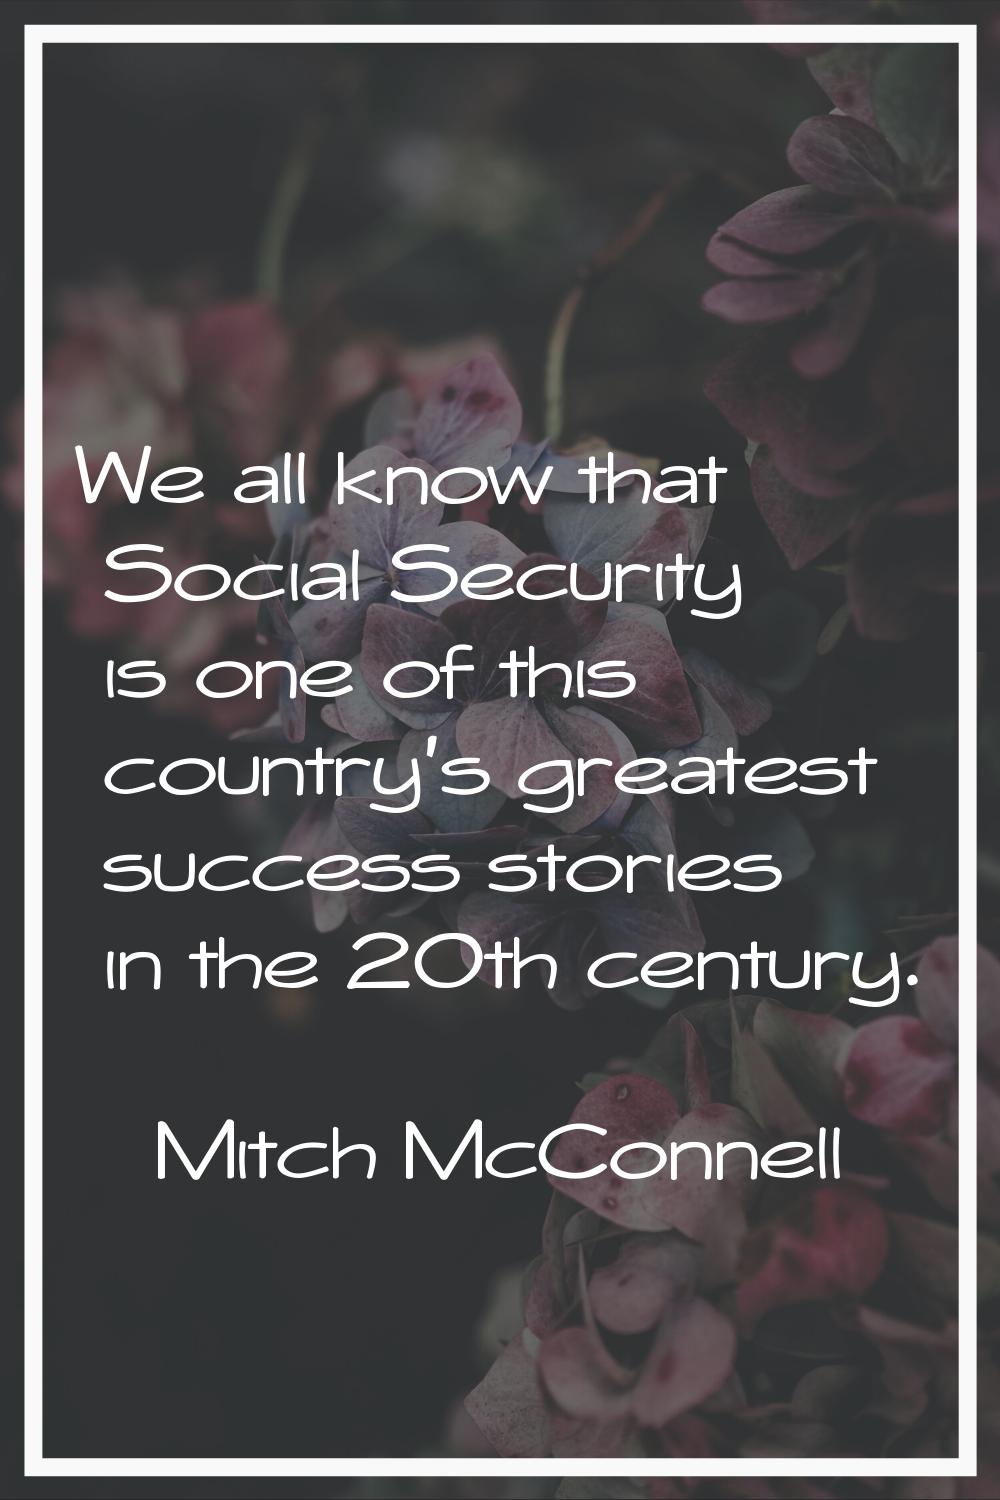 We all know that Social Security is one of this country's greatest success stories in the 20th cent